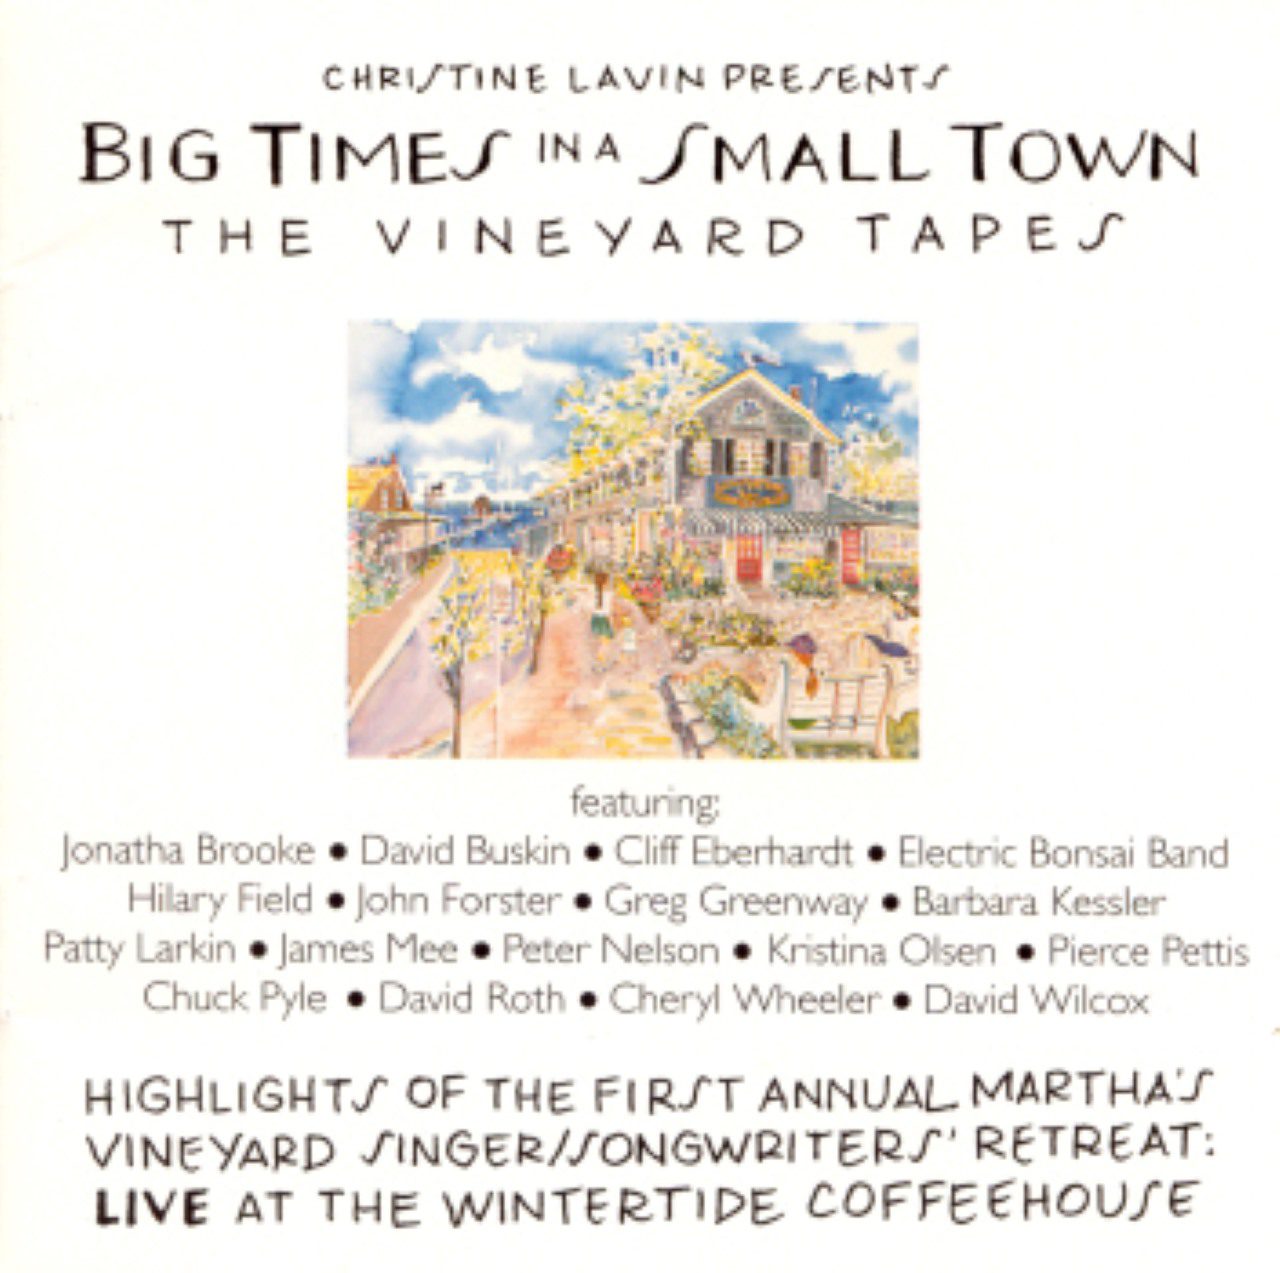 A.A.V.V. – Big Times In A Small Town cover album